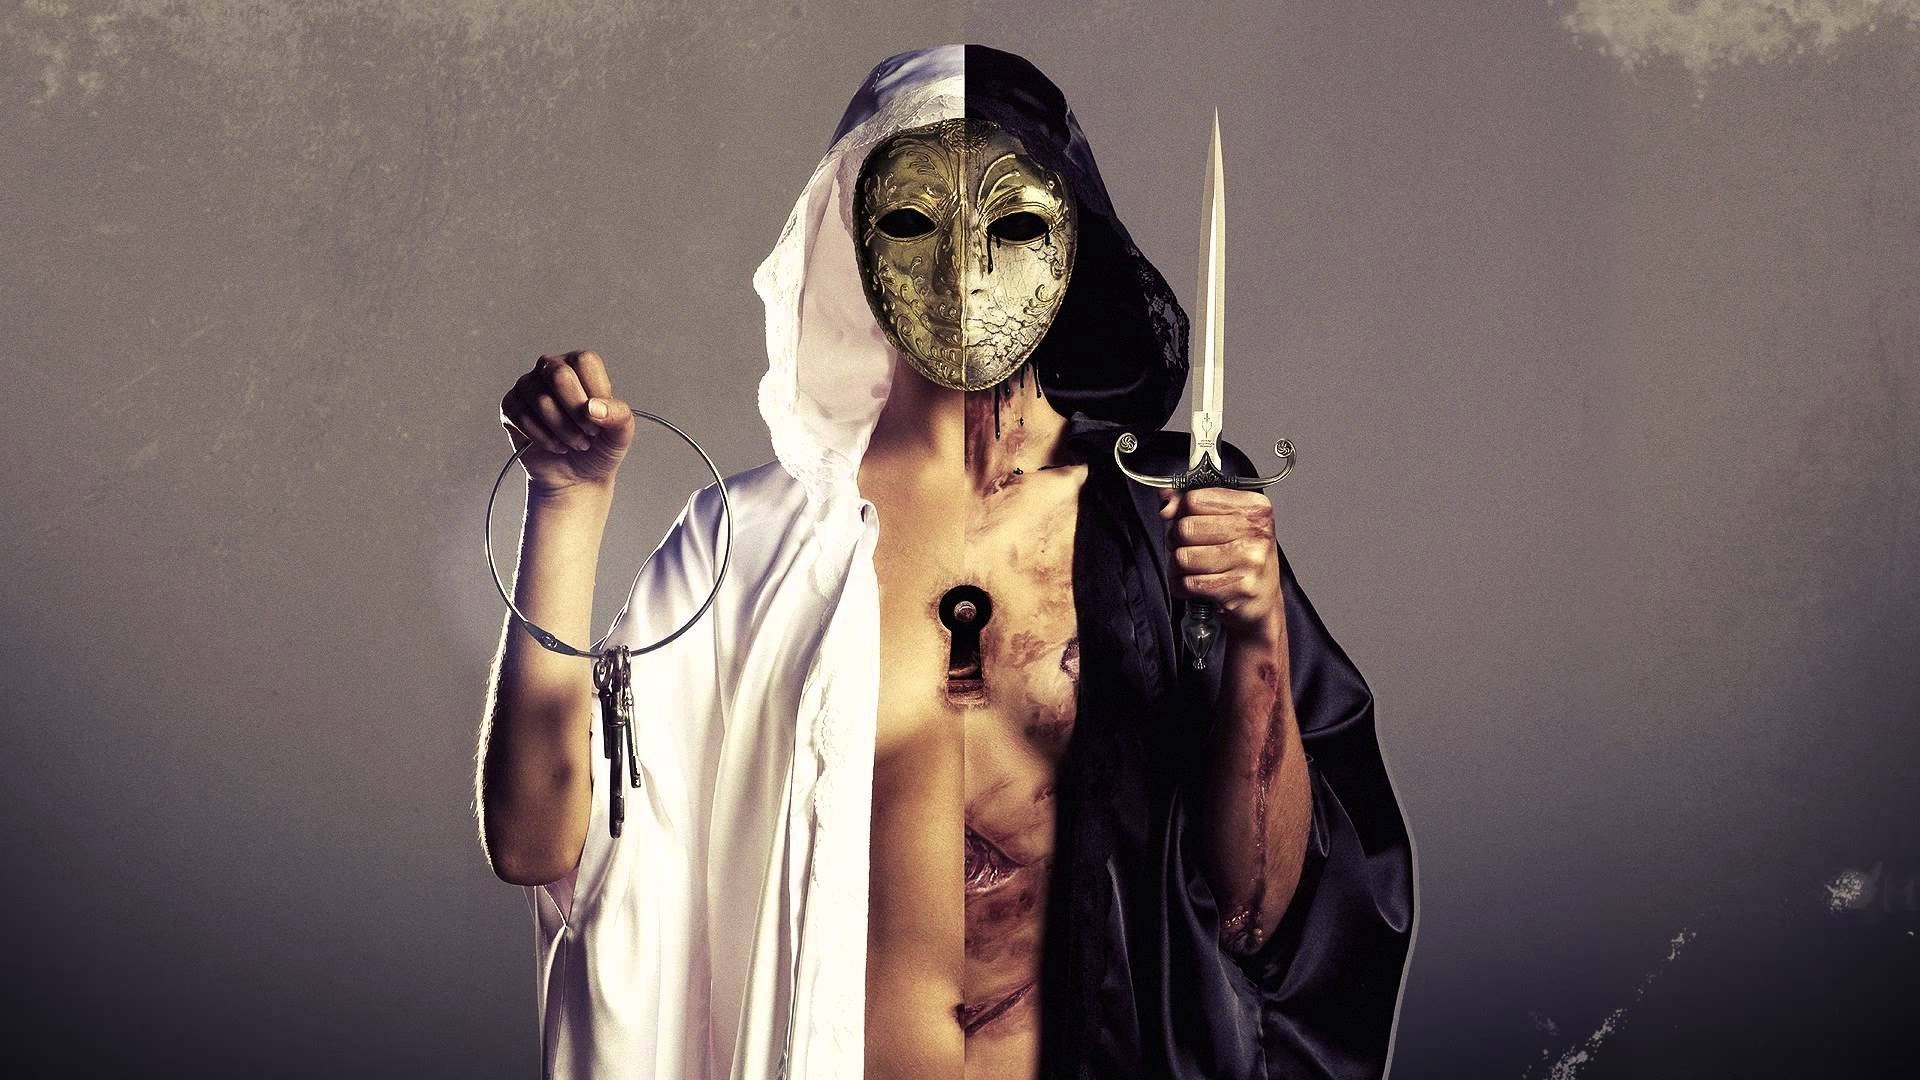 1920x1080 Bring Me The Horizon, Rock Music, Mask, Knife, Rock Bands Wallpapers HD /  Desktop and Mobile Backgrounds